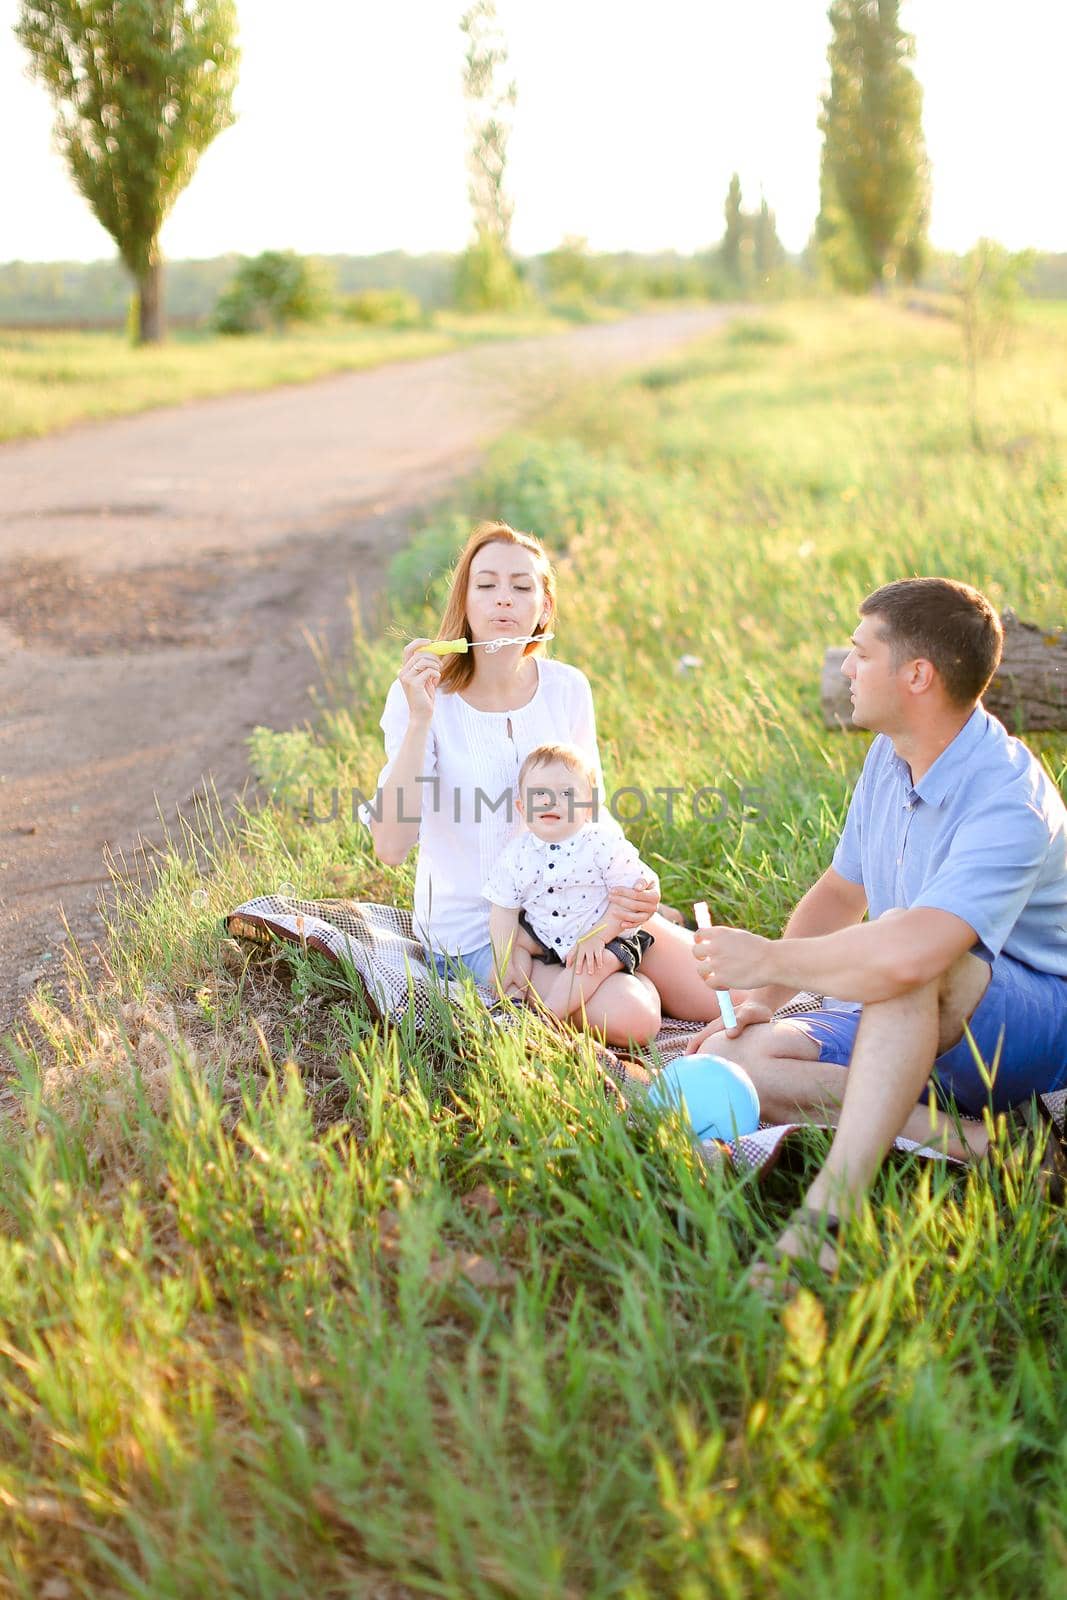 Young happy father and blonde mother sitting on grass with little baby and blowing bubbles. Concept of picnic with child and resting on nature.